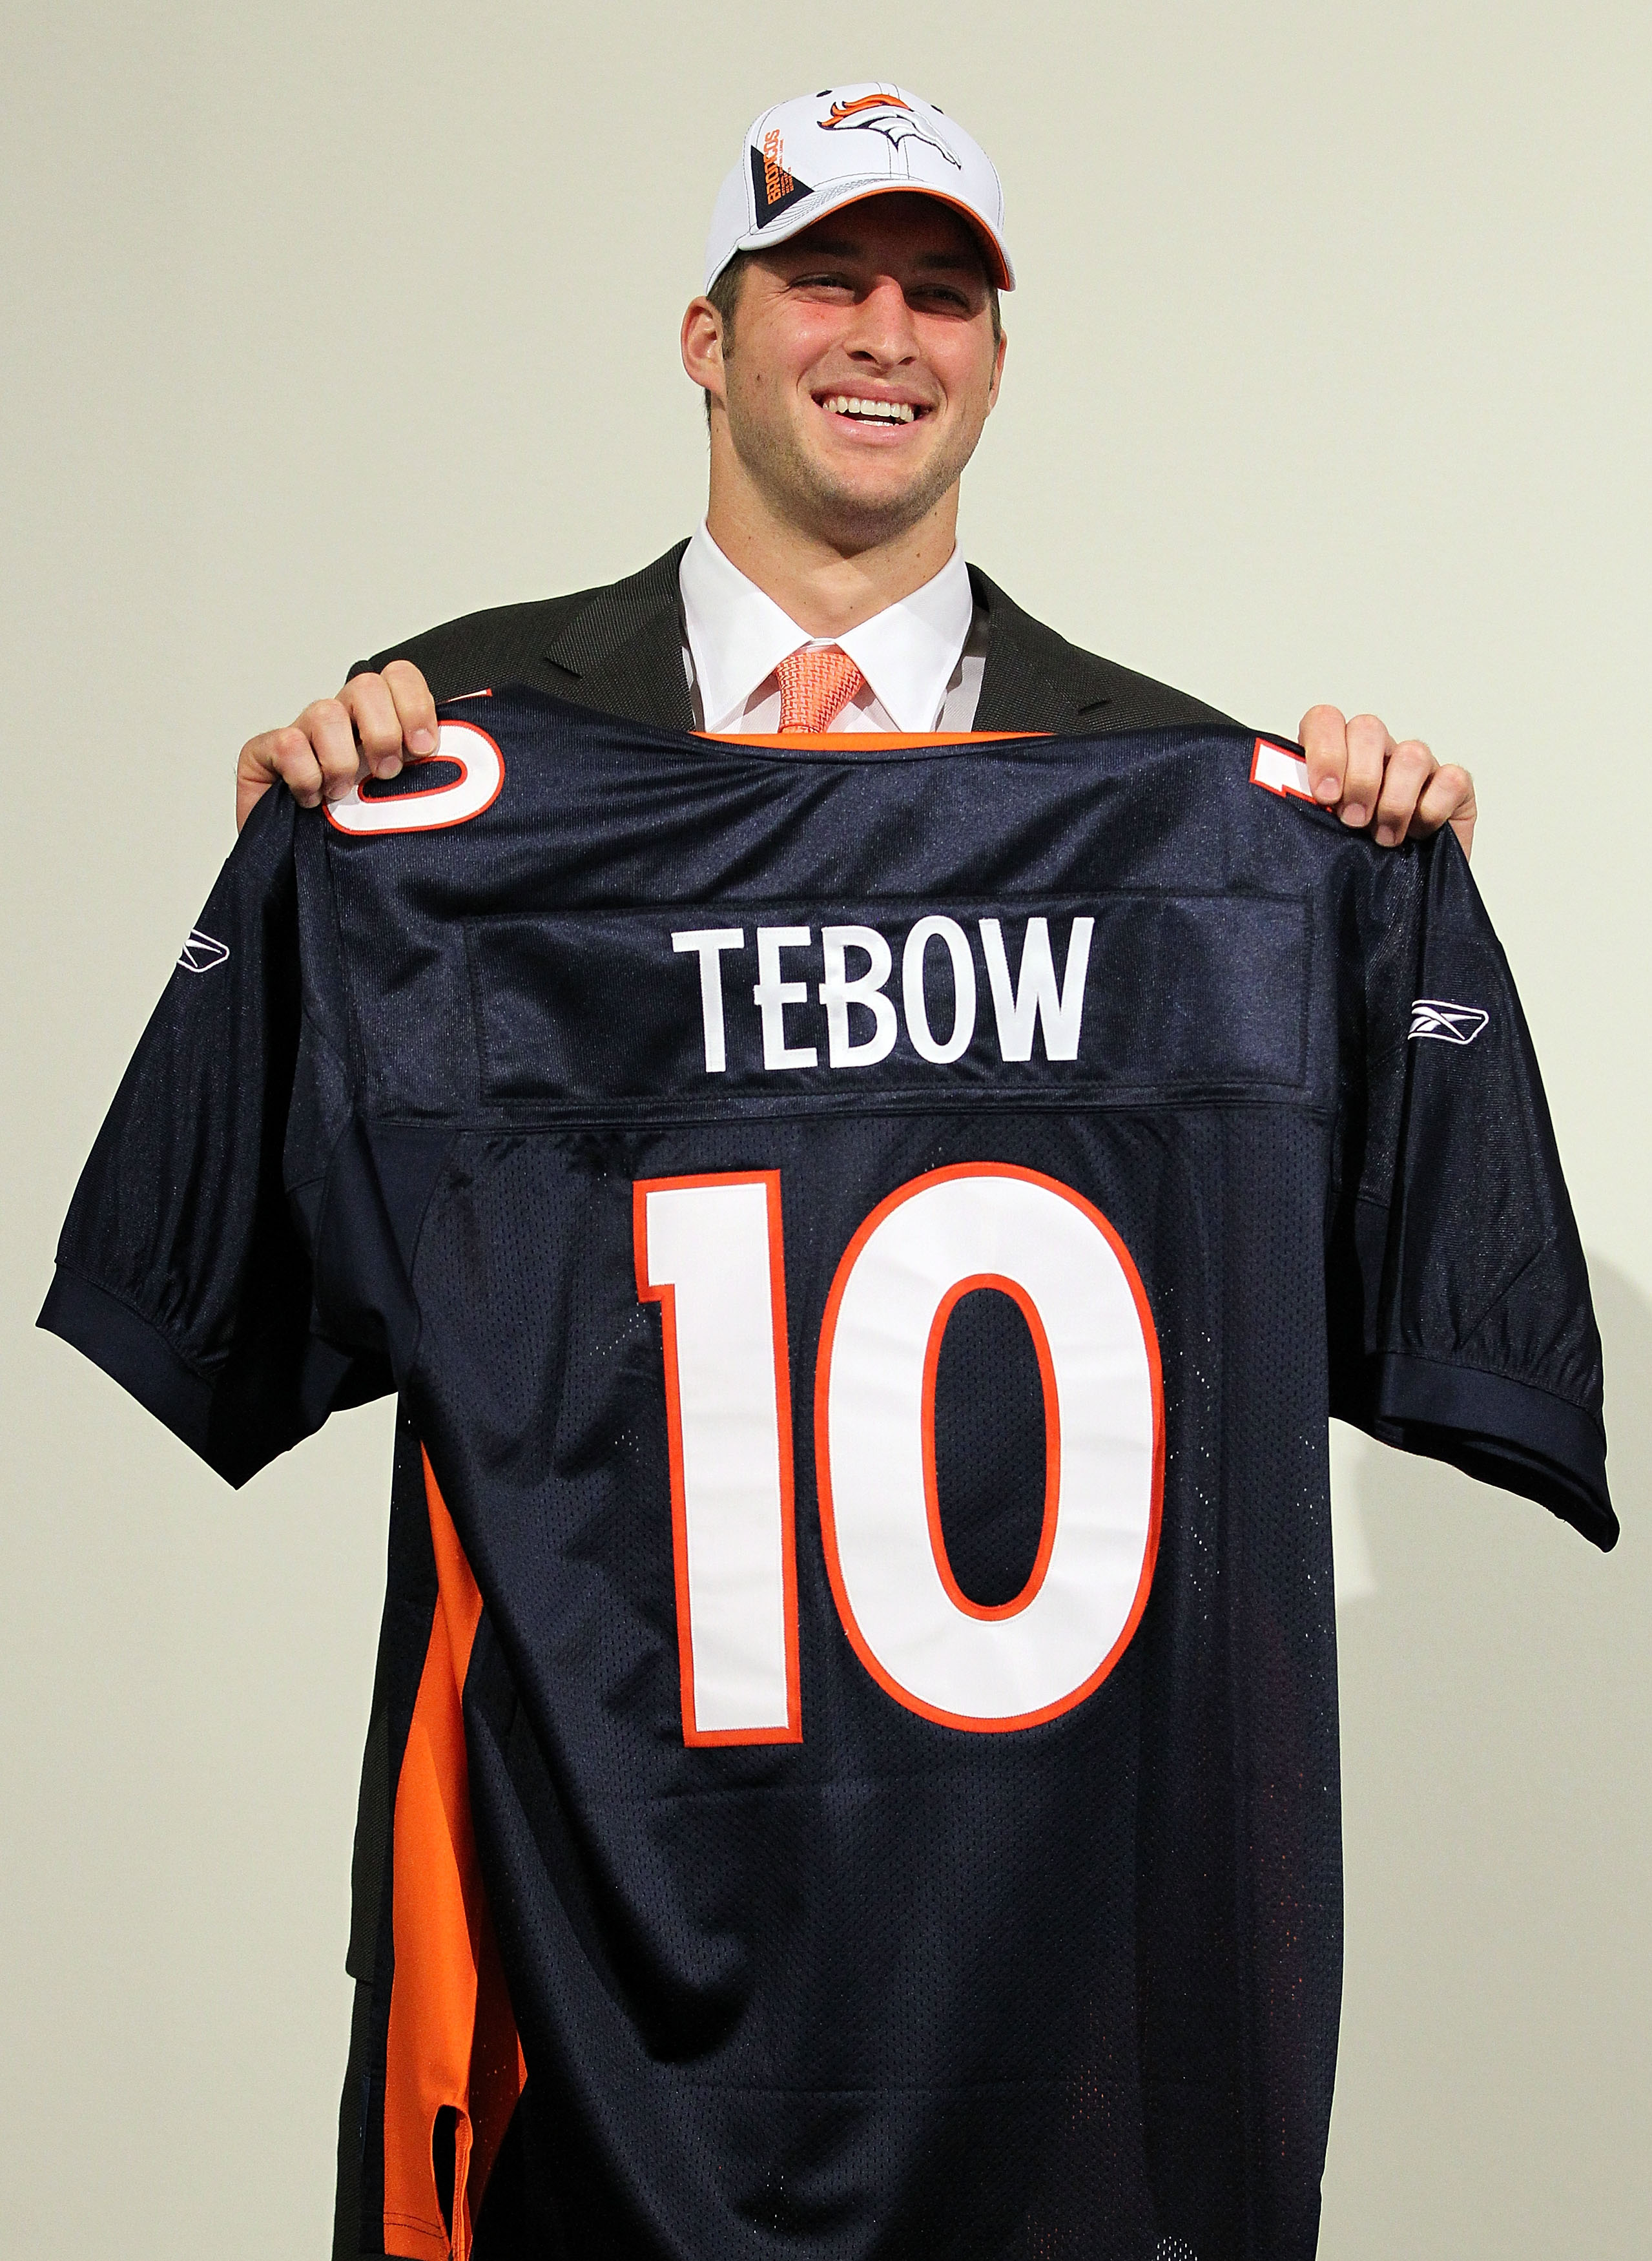 ENGLEWOOD, CO - APRIL 23:  Tim Tebow is introduced by the Denver Broncos at a press conference at the Broncos Headquarters in Dove Valley on April 23, 2010 in Englewood, Colorado. The Broncos picked Tebow in the first round of the 2010 NFL draft.  (Photo